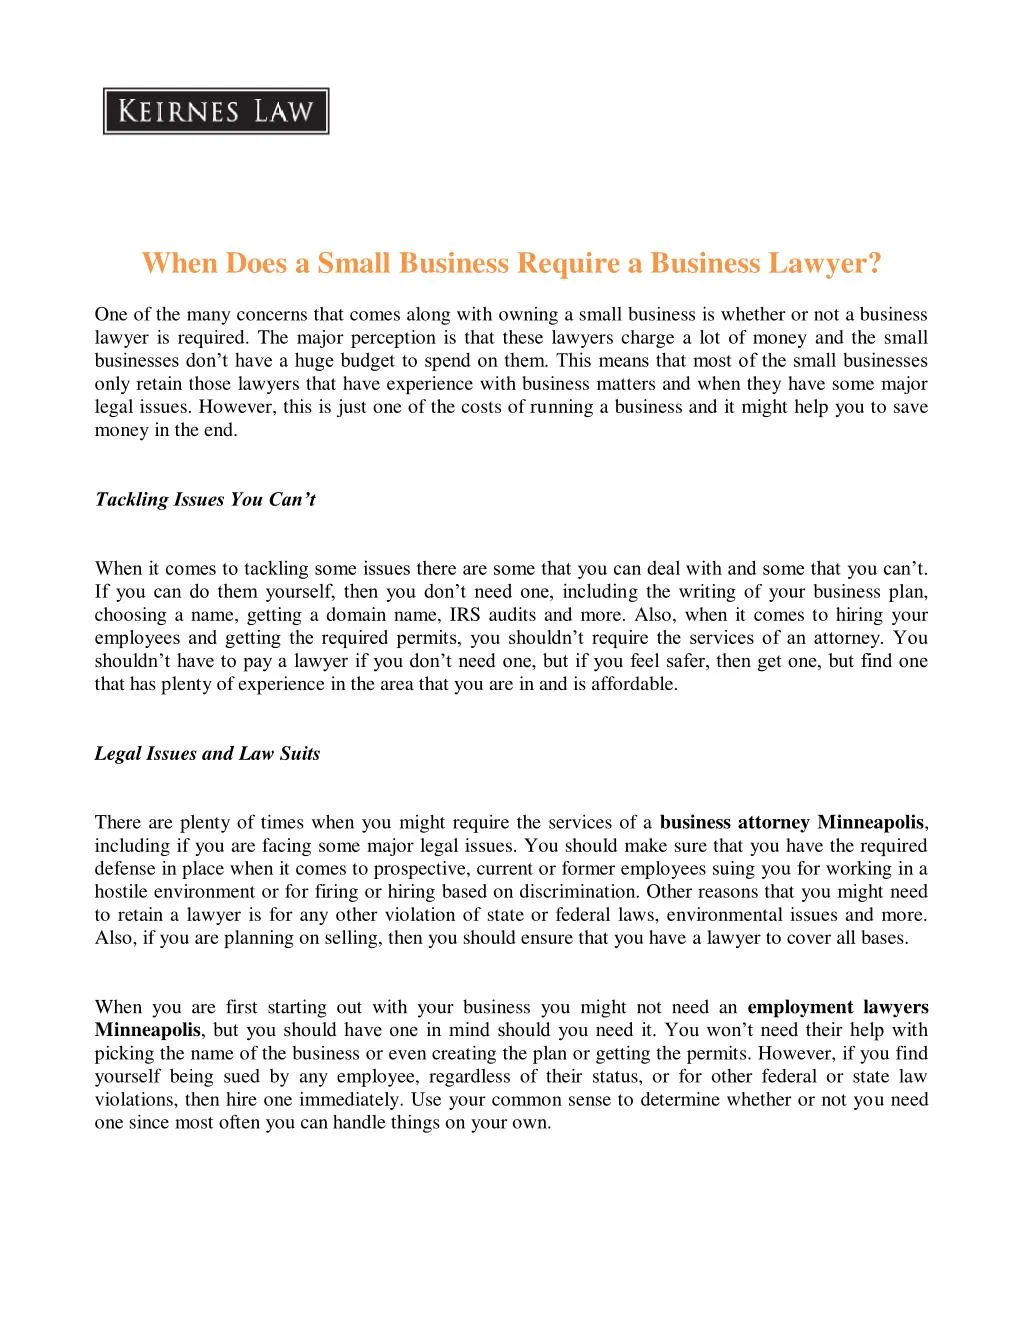 when does a small business require a business